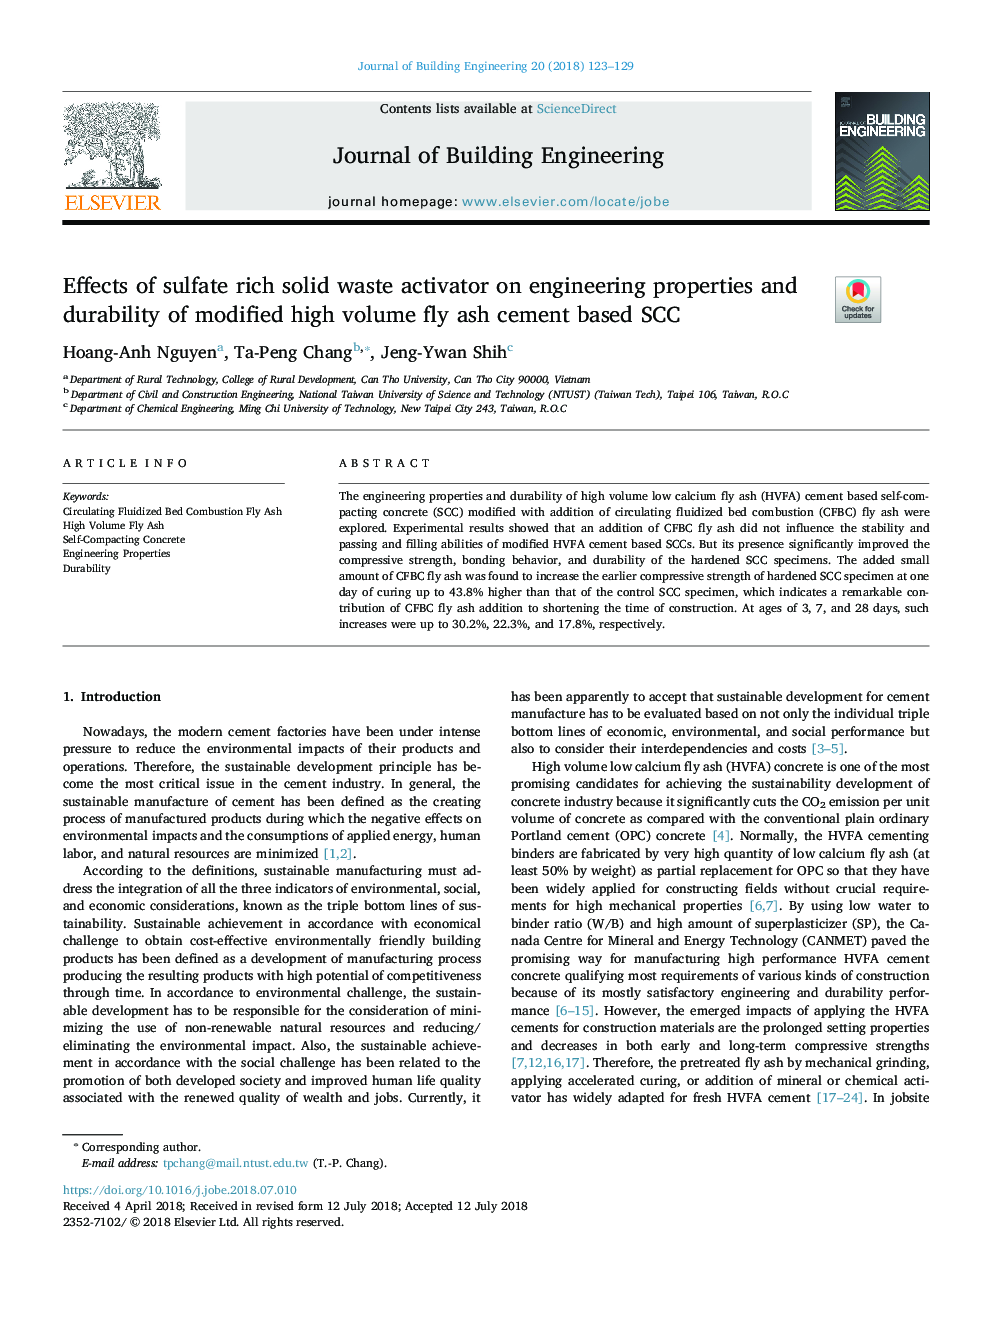 Effects of sulfate rich solid waste activator on engineering properties and durability of modified high volume fly ash cement based SCC